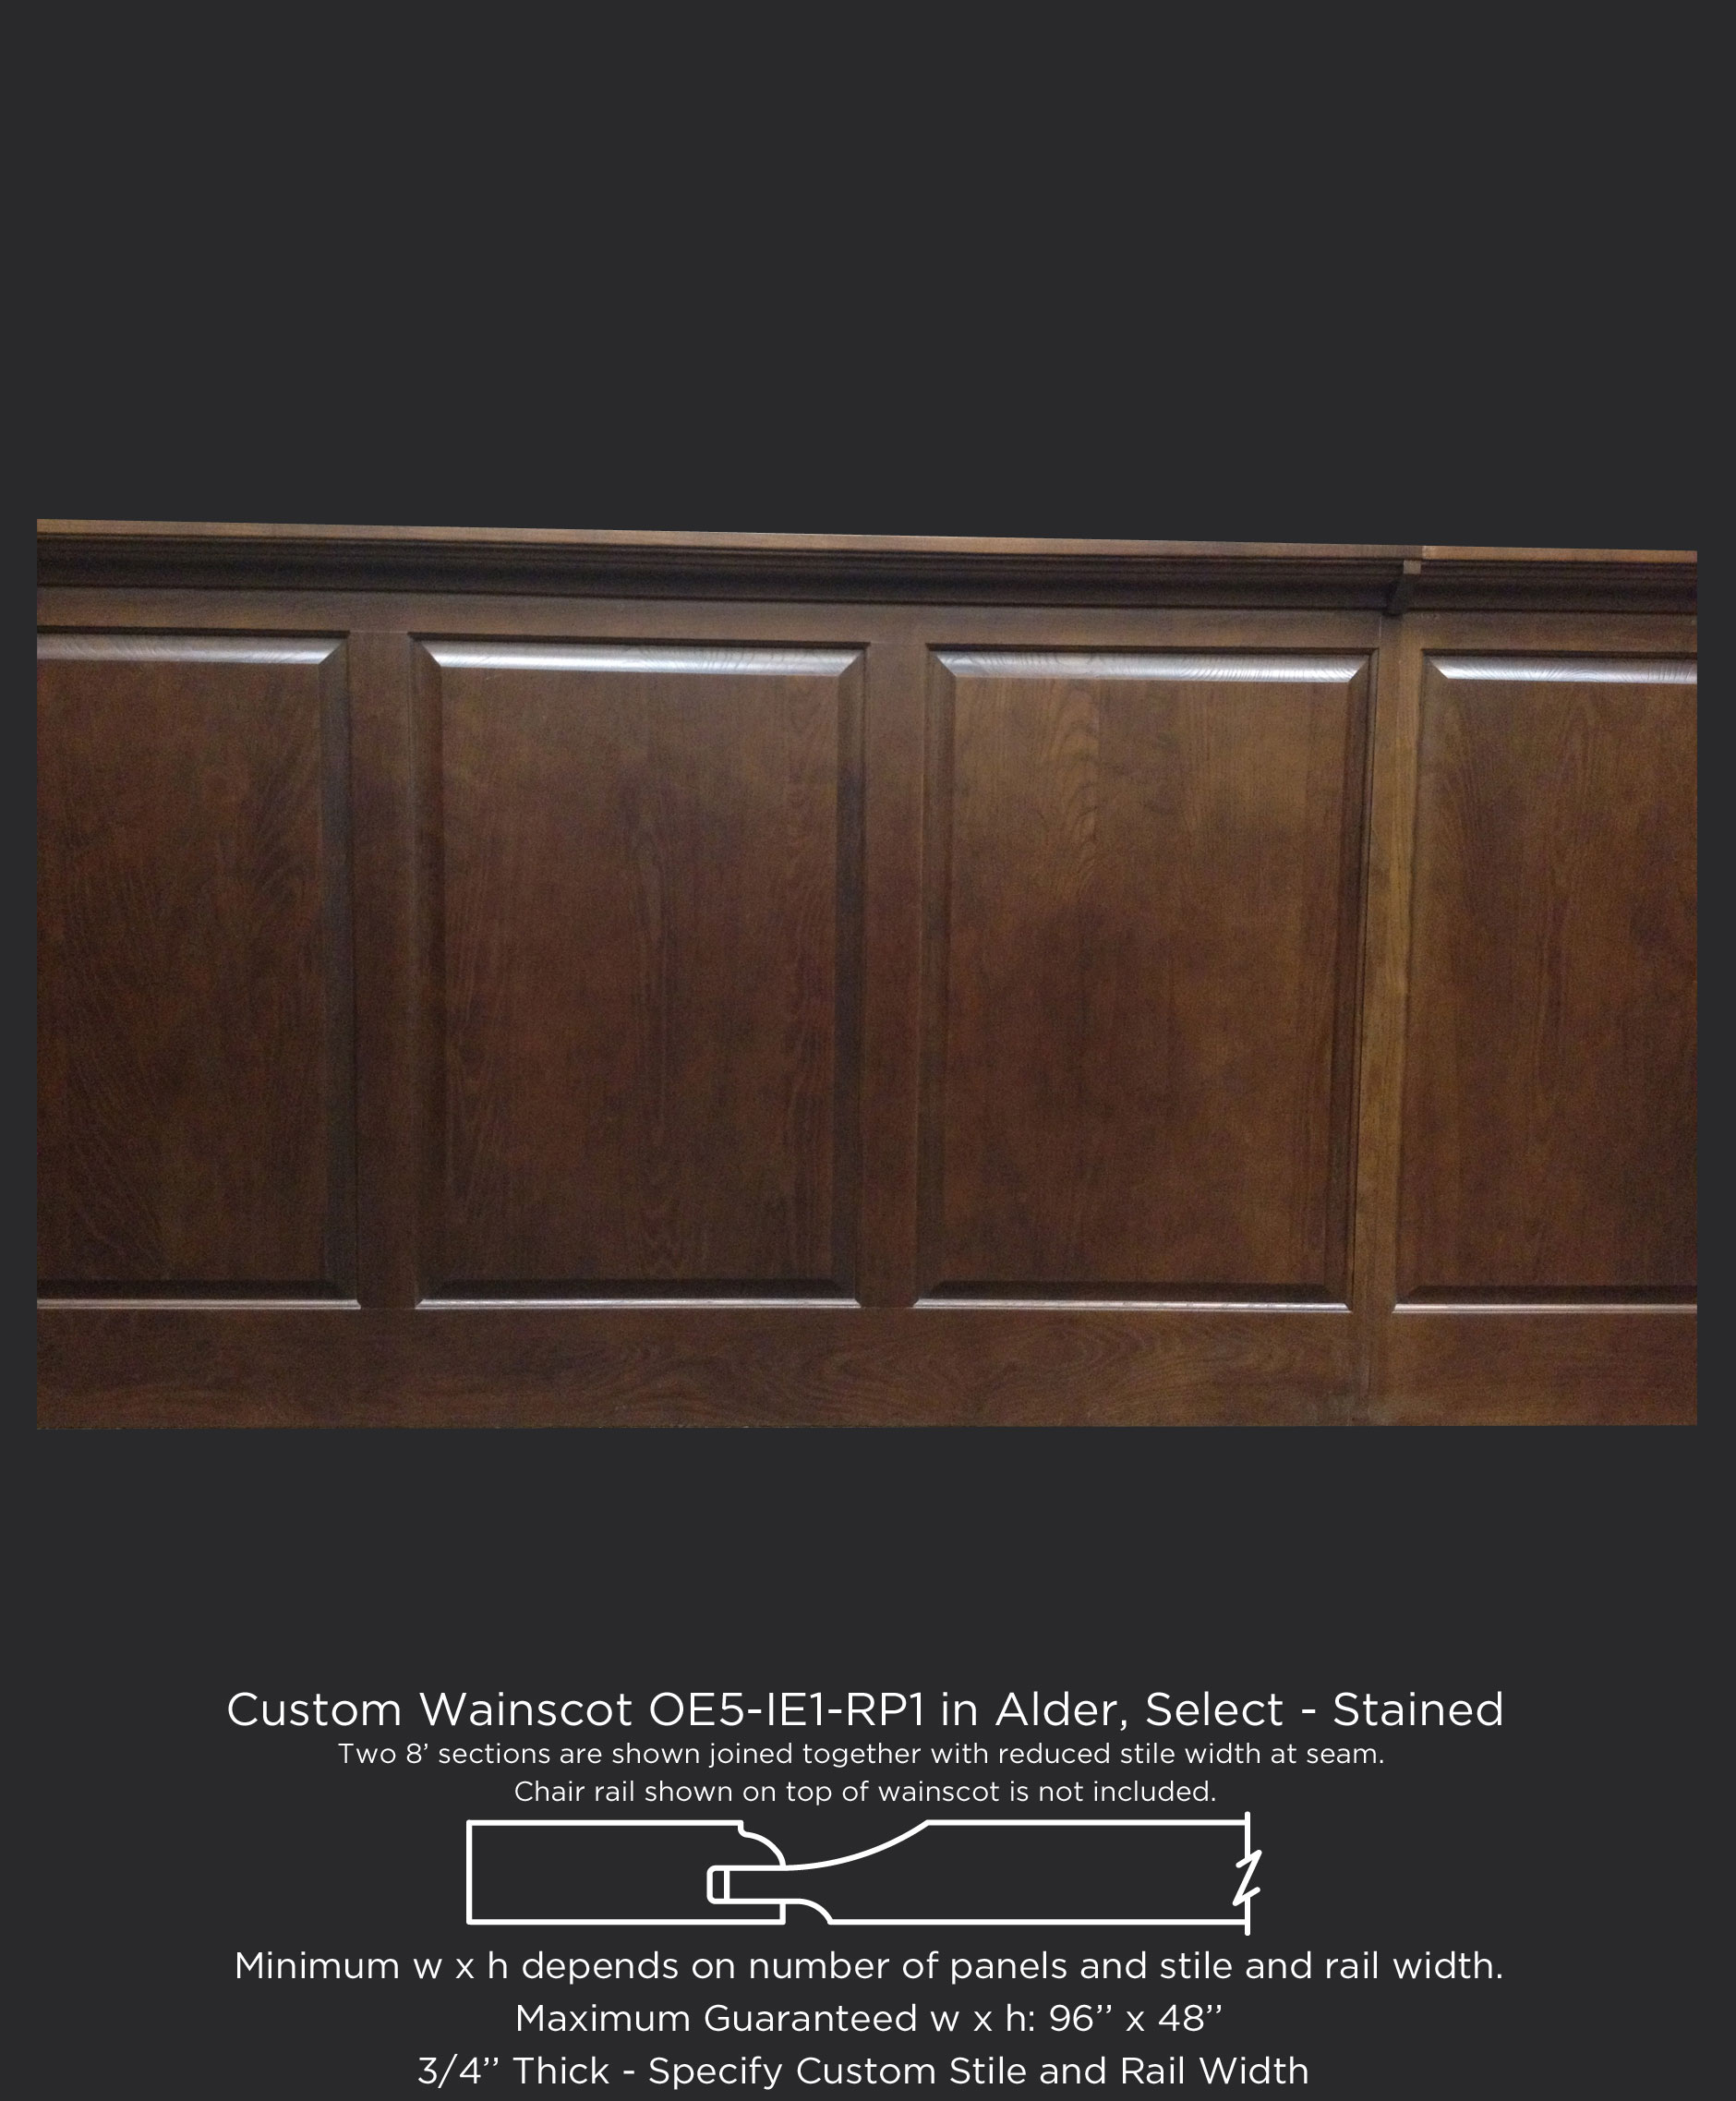 Custom wood wainscot with OE5-IE1-RP1 in Alder, Select and customer applied stained